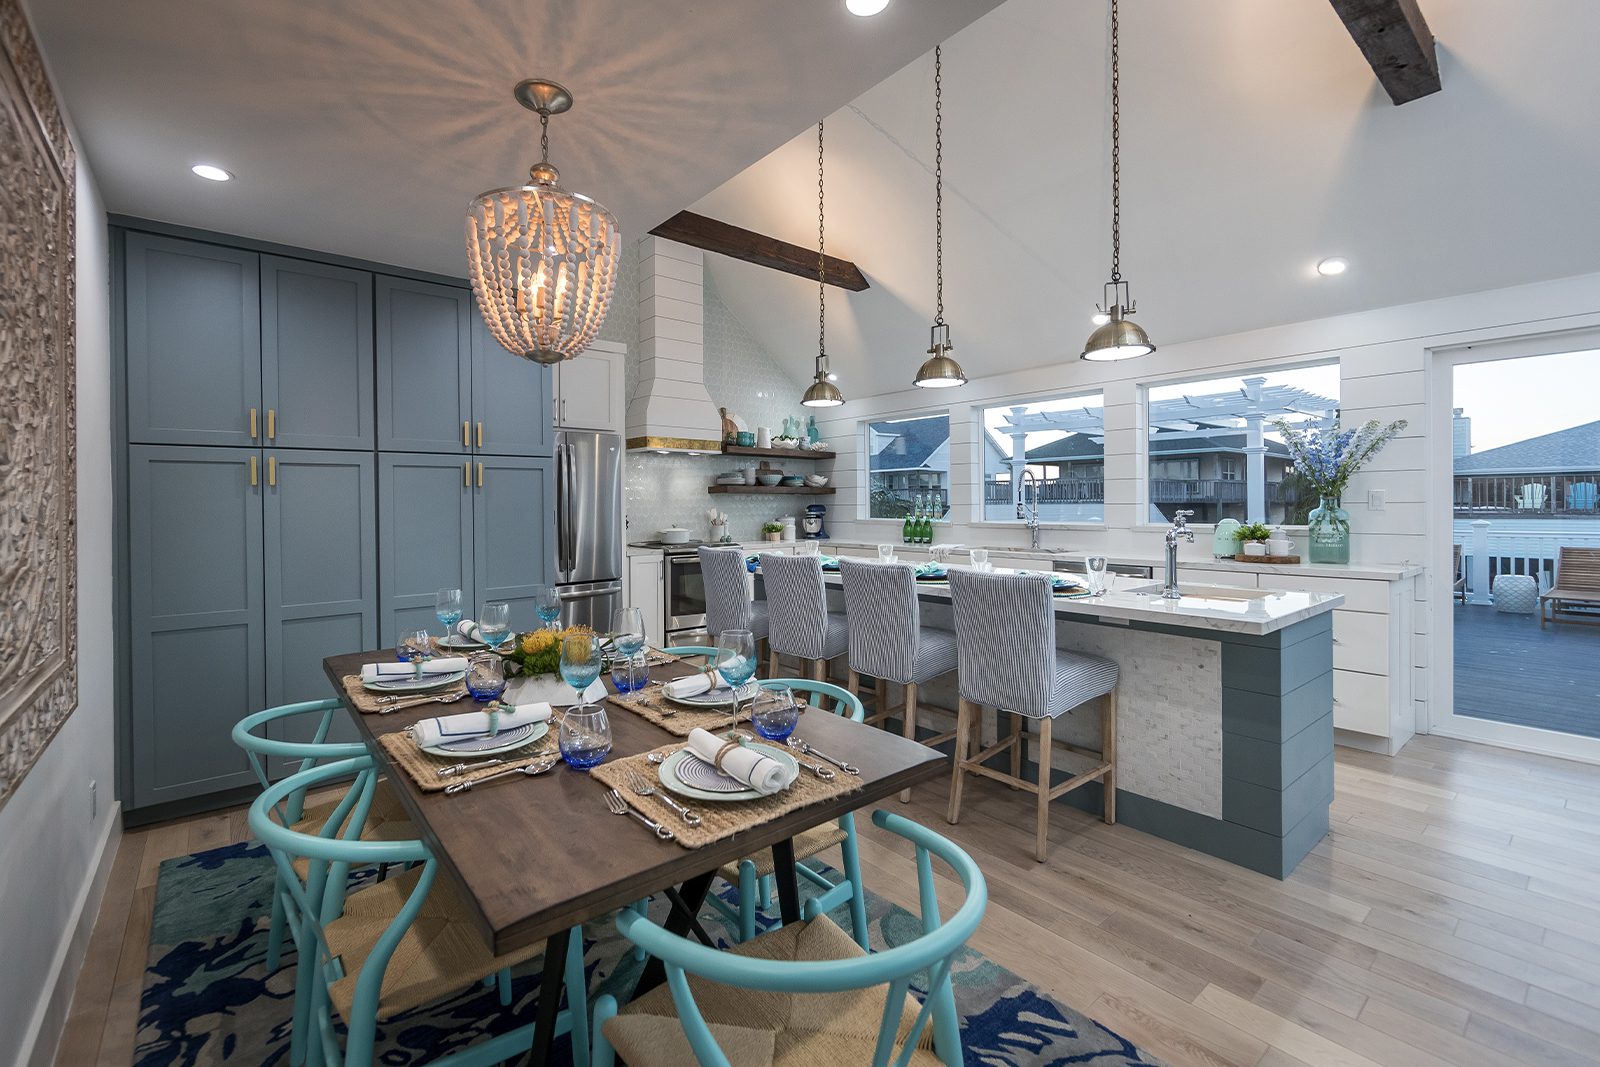 brother vs brother reveal team drew bright blue kitchen chairs and open concept floorplan